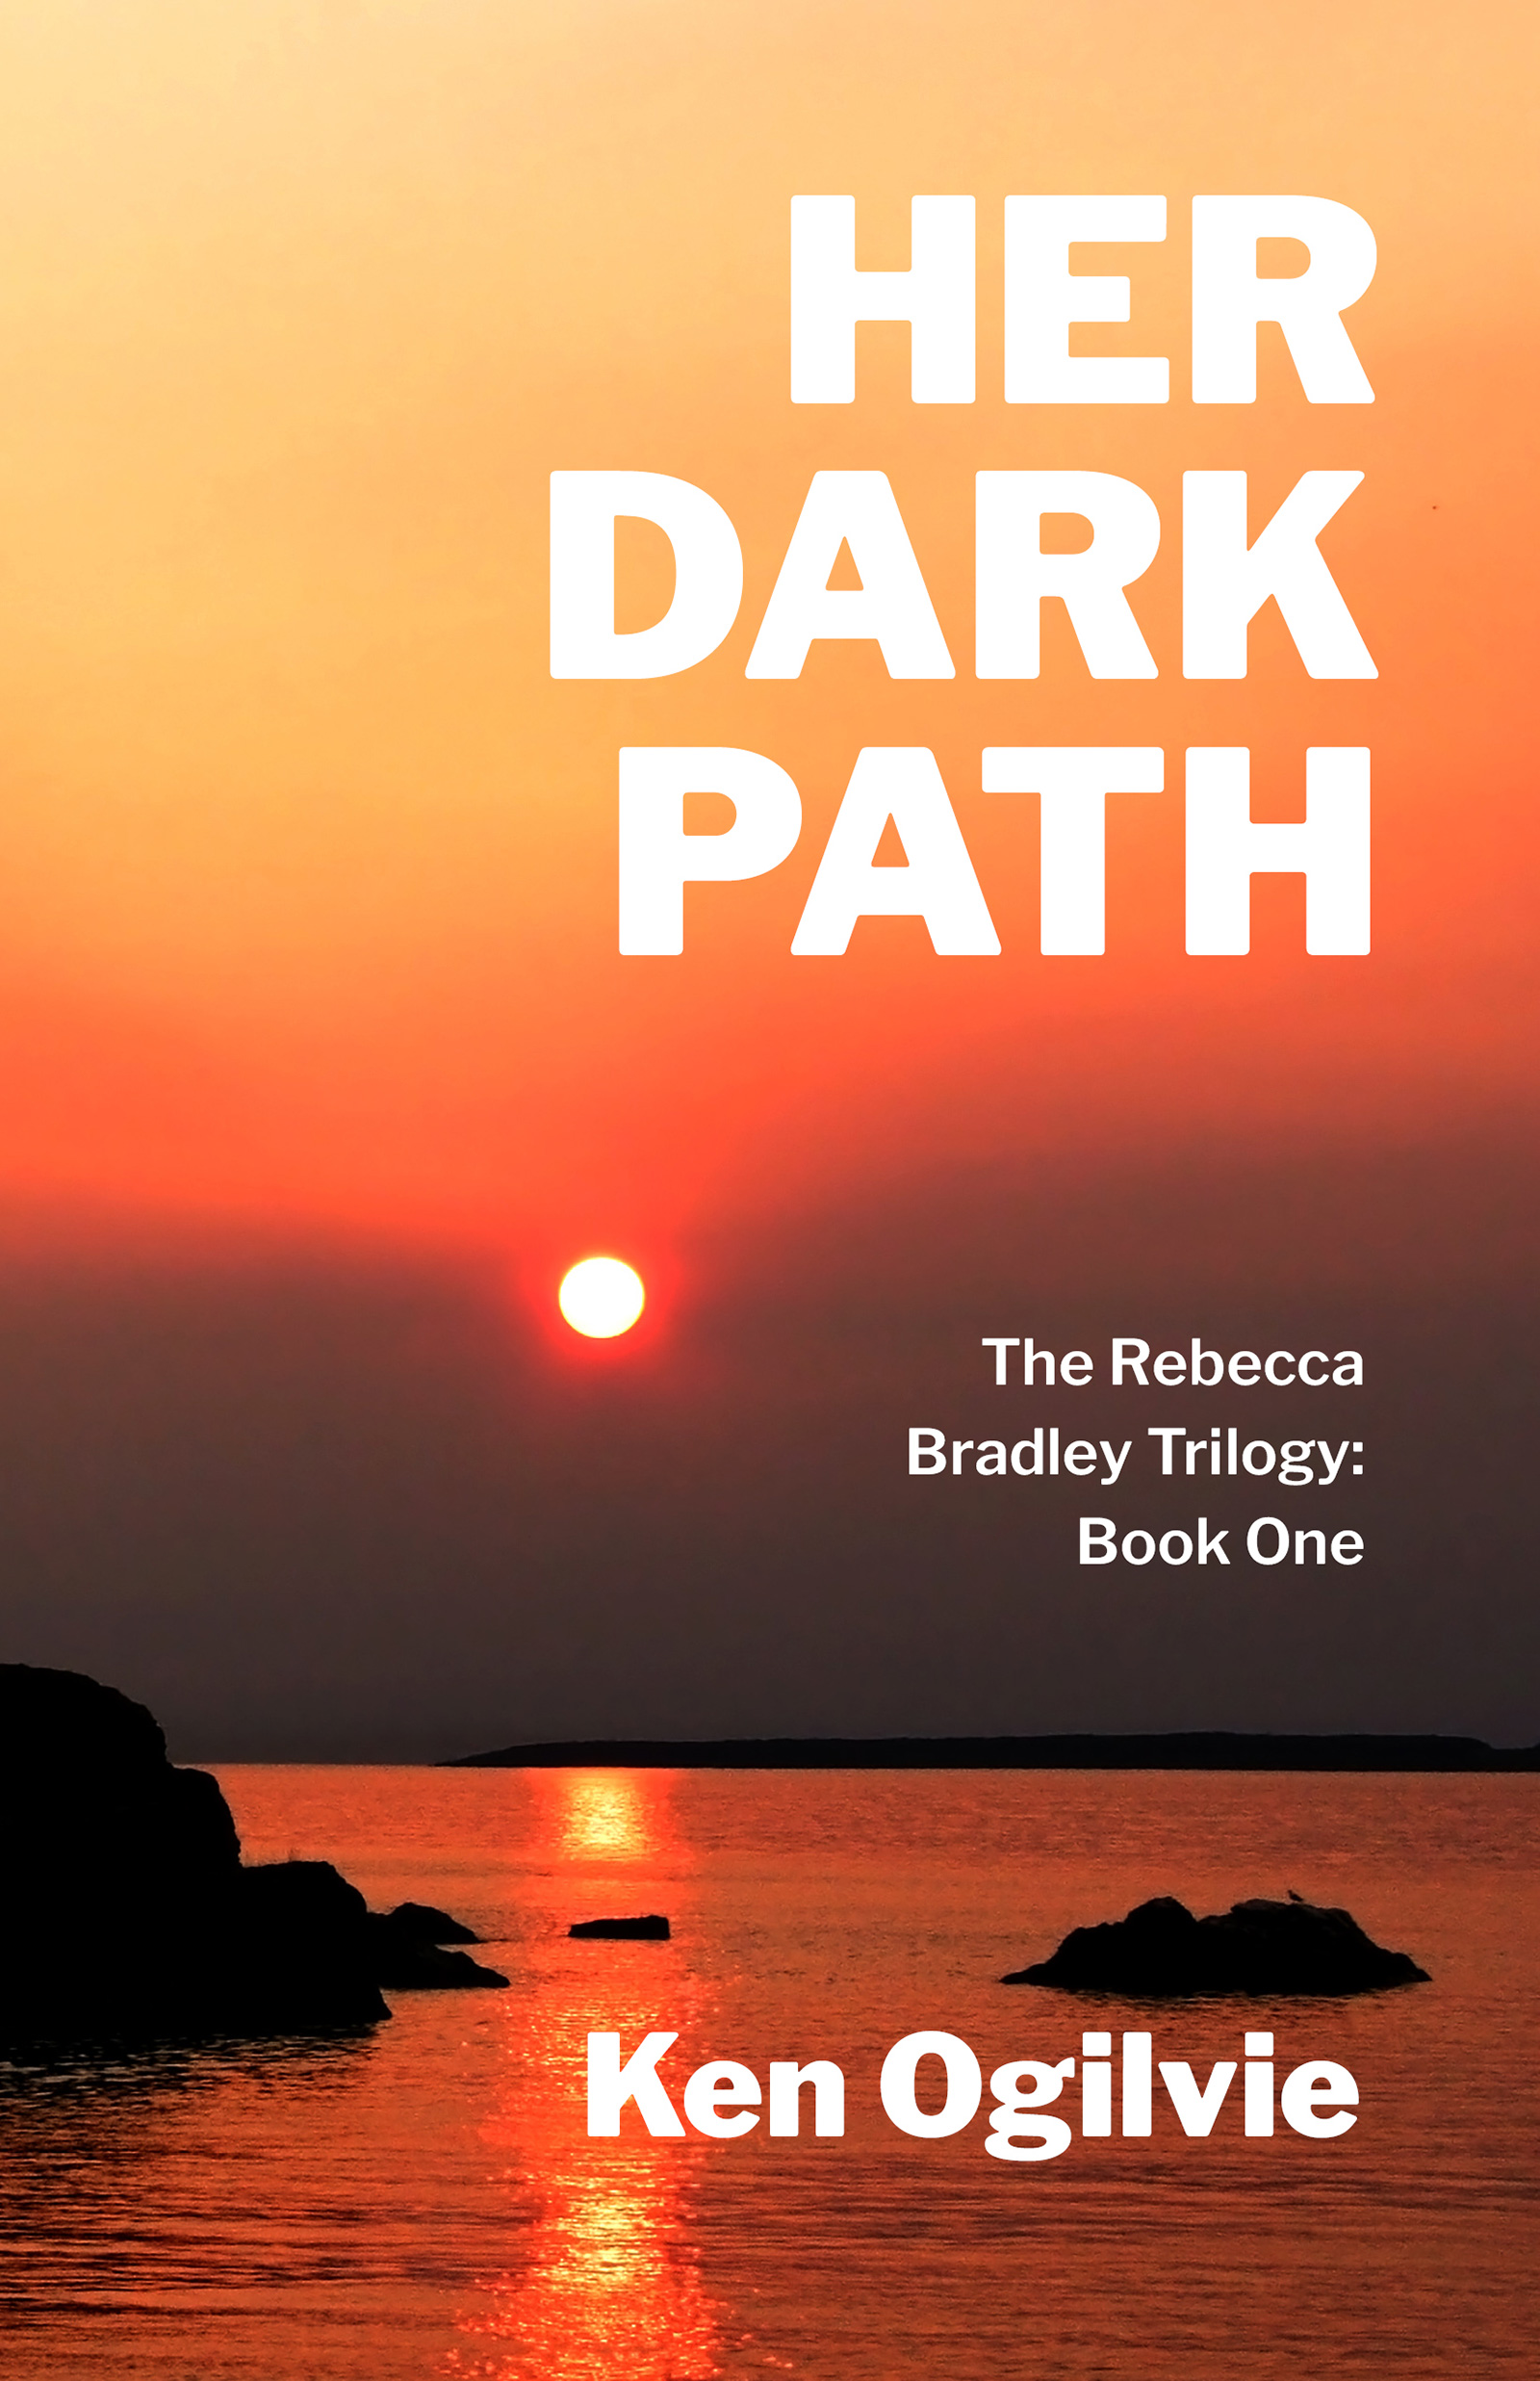 Her Dark Path book cover image